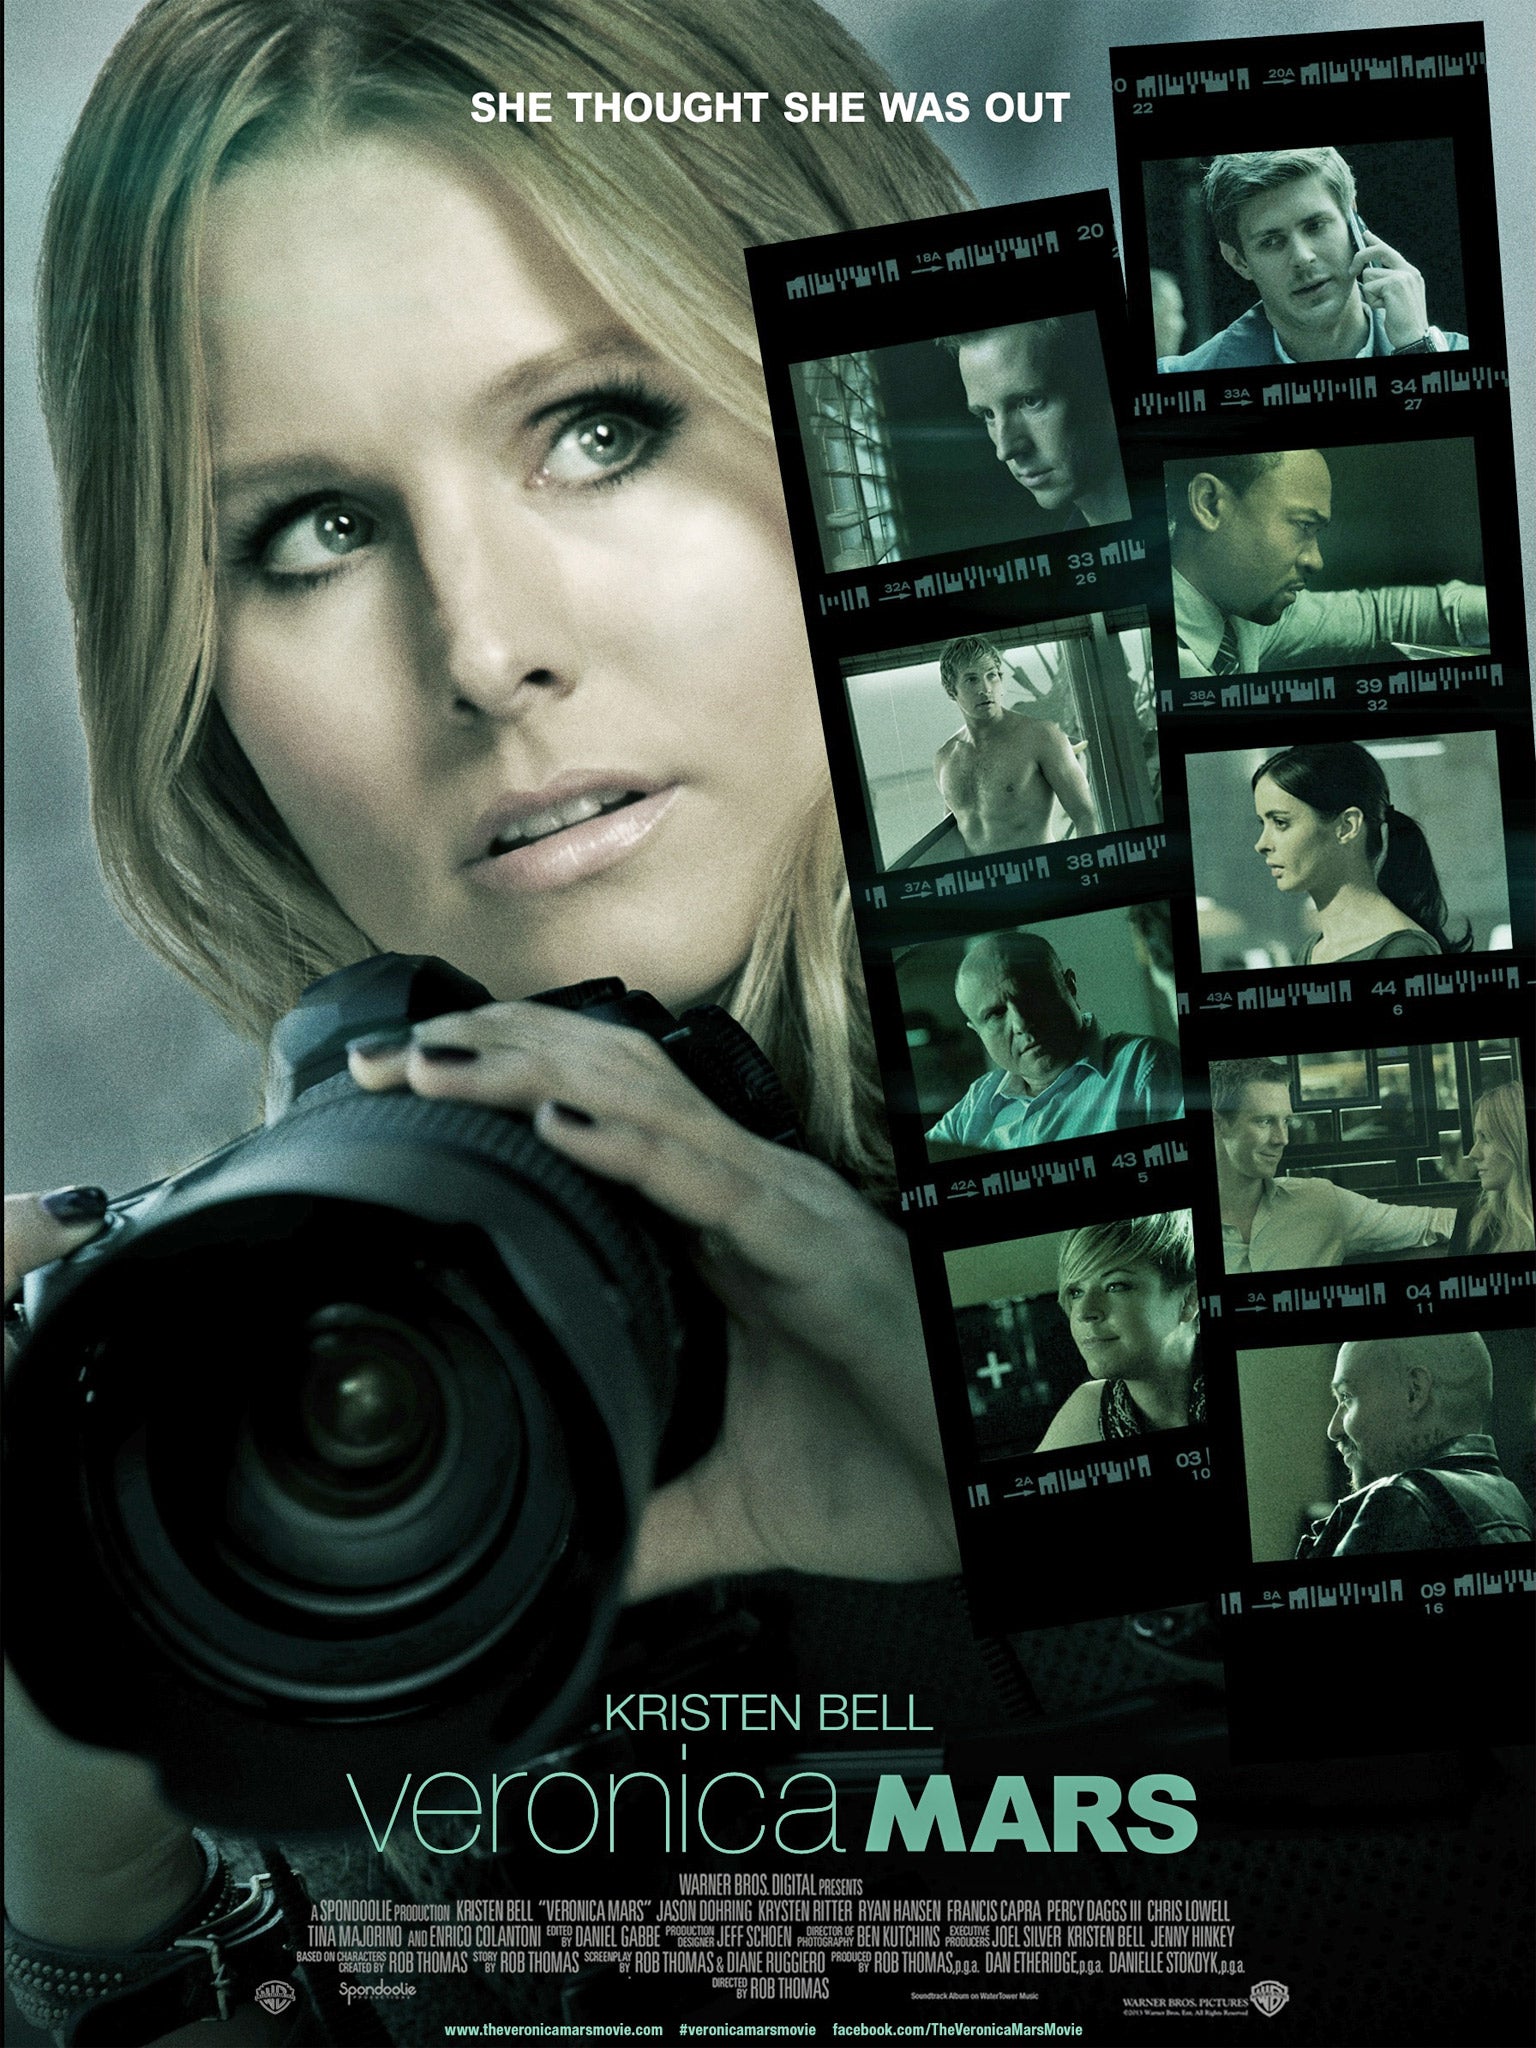 'Veronica Mars' will hit the silver screen in March